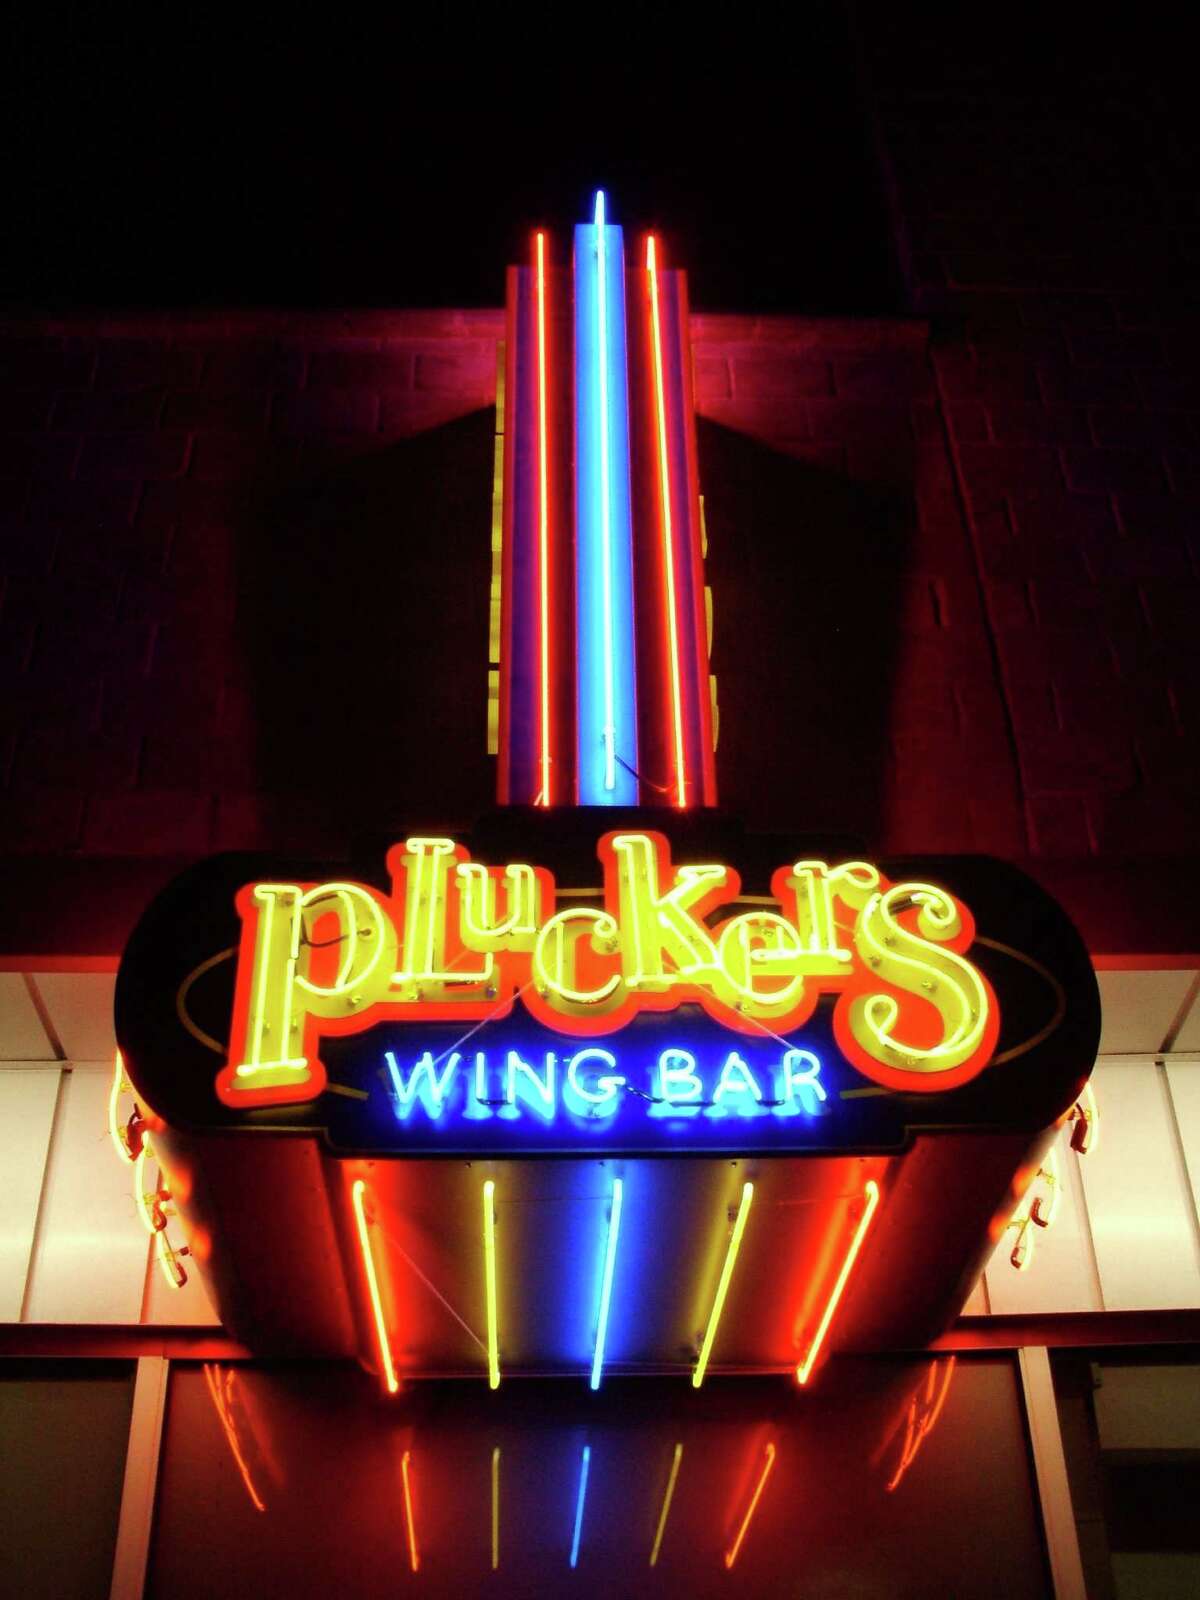 Austin-based Pluckers Wing Bar started near the University of Texas campus. Pluckers will be adding a Houston location at the end of the year.